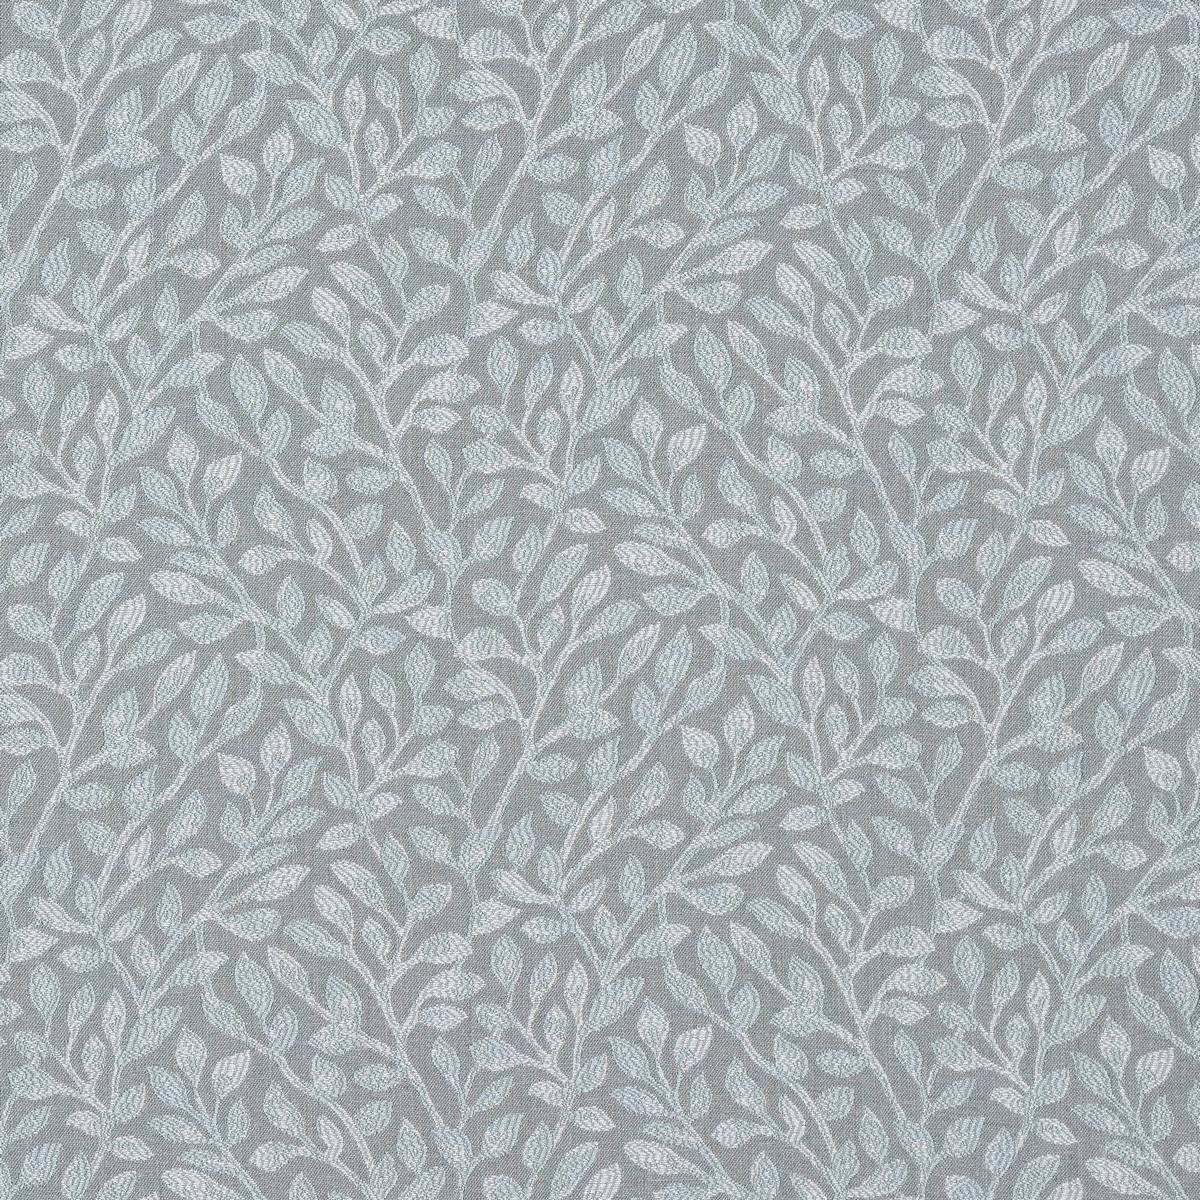 Foxley Duckegg Fabric by Porter & Stone